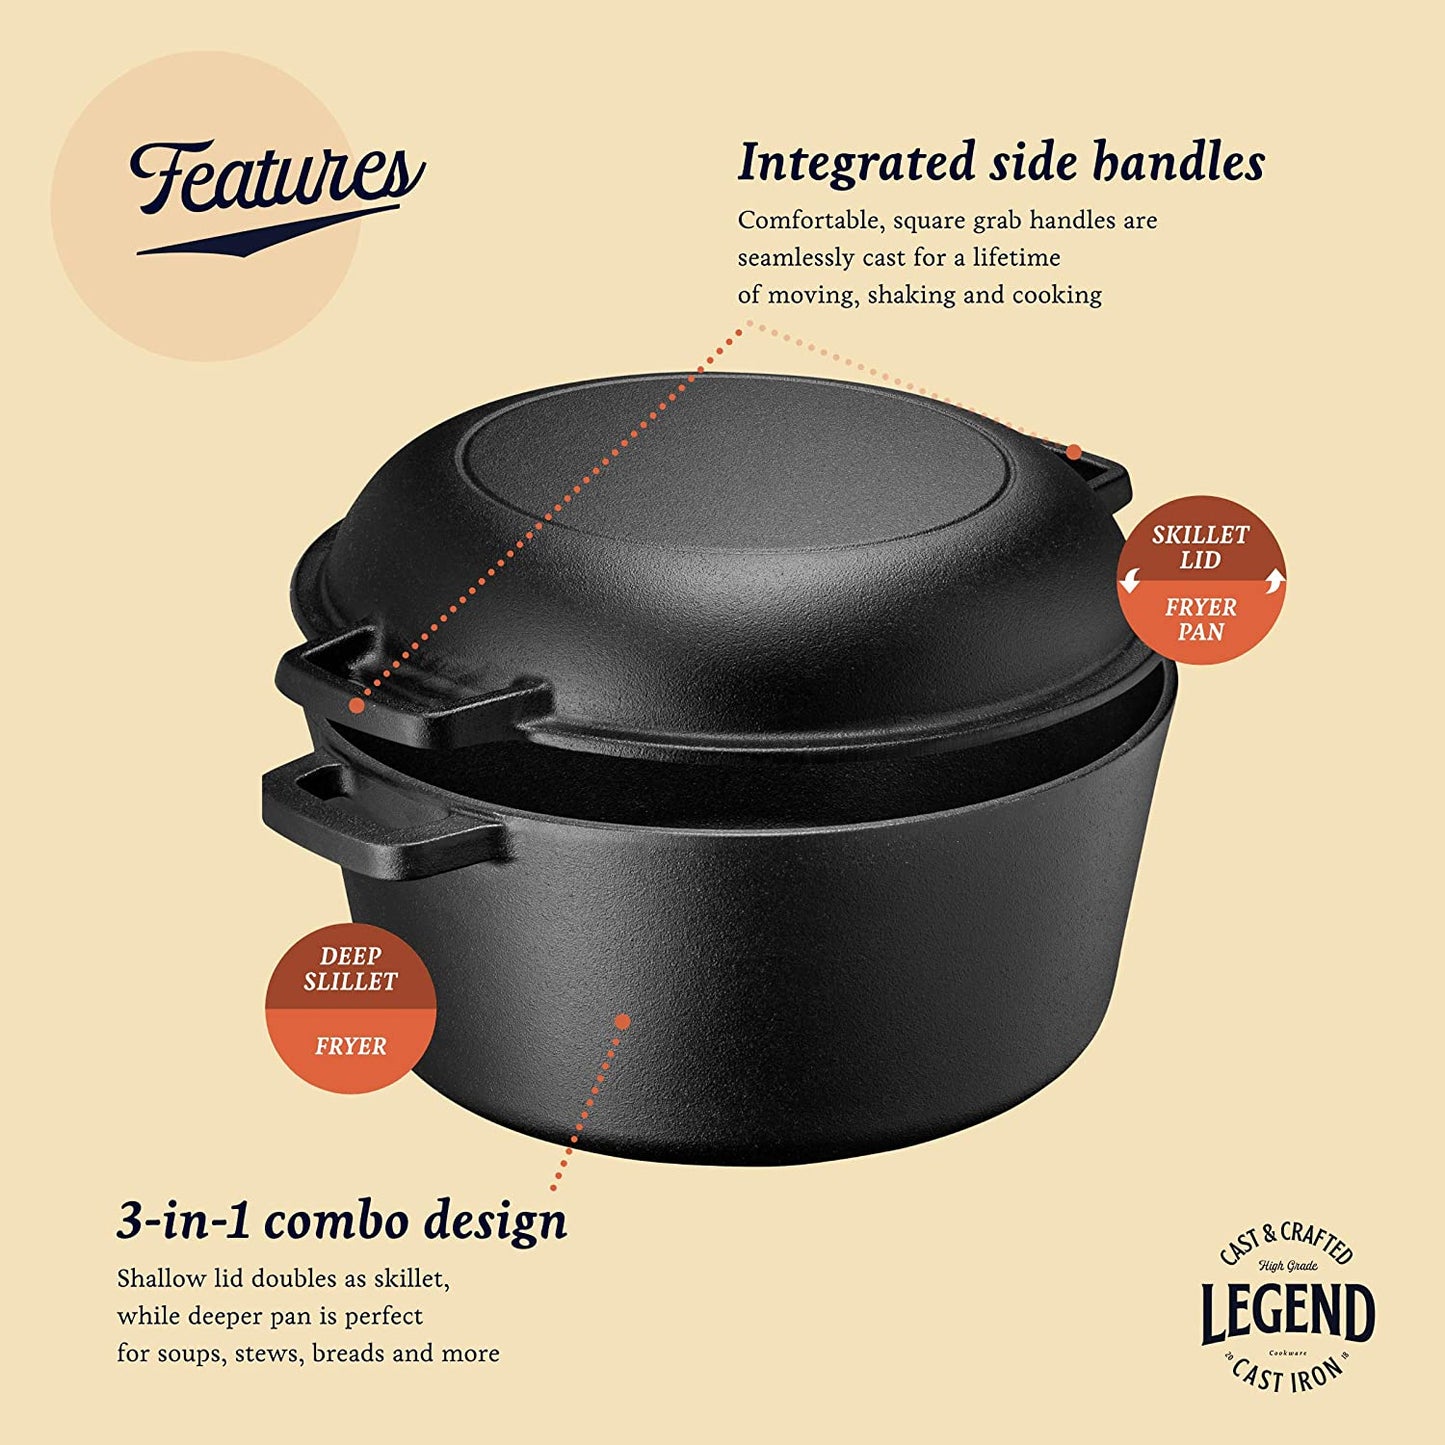 Legend Cookware Cast Iron Dutch Oven | 7qt Heavy-Duty Stock Pot for Frying,  Cooking, Baking & Broiling on Induction, Electric, Gas & In Oven | Lightly